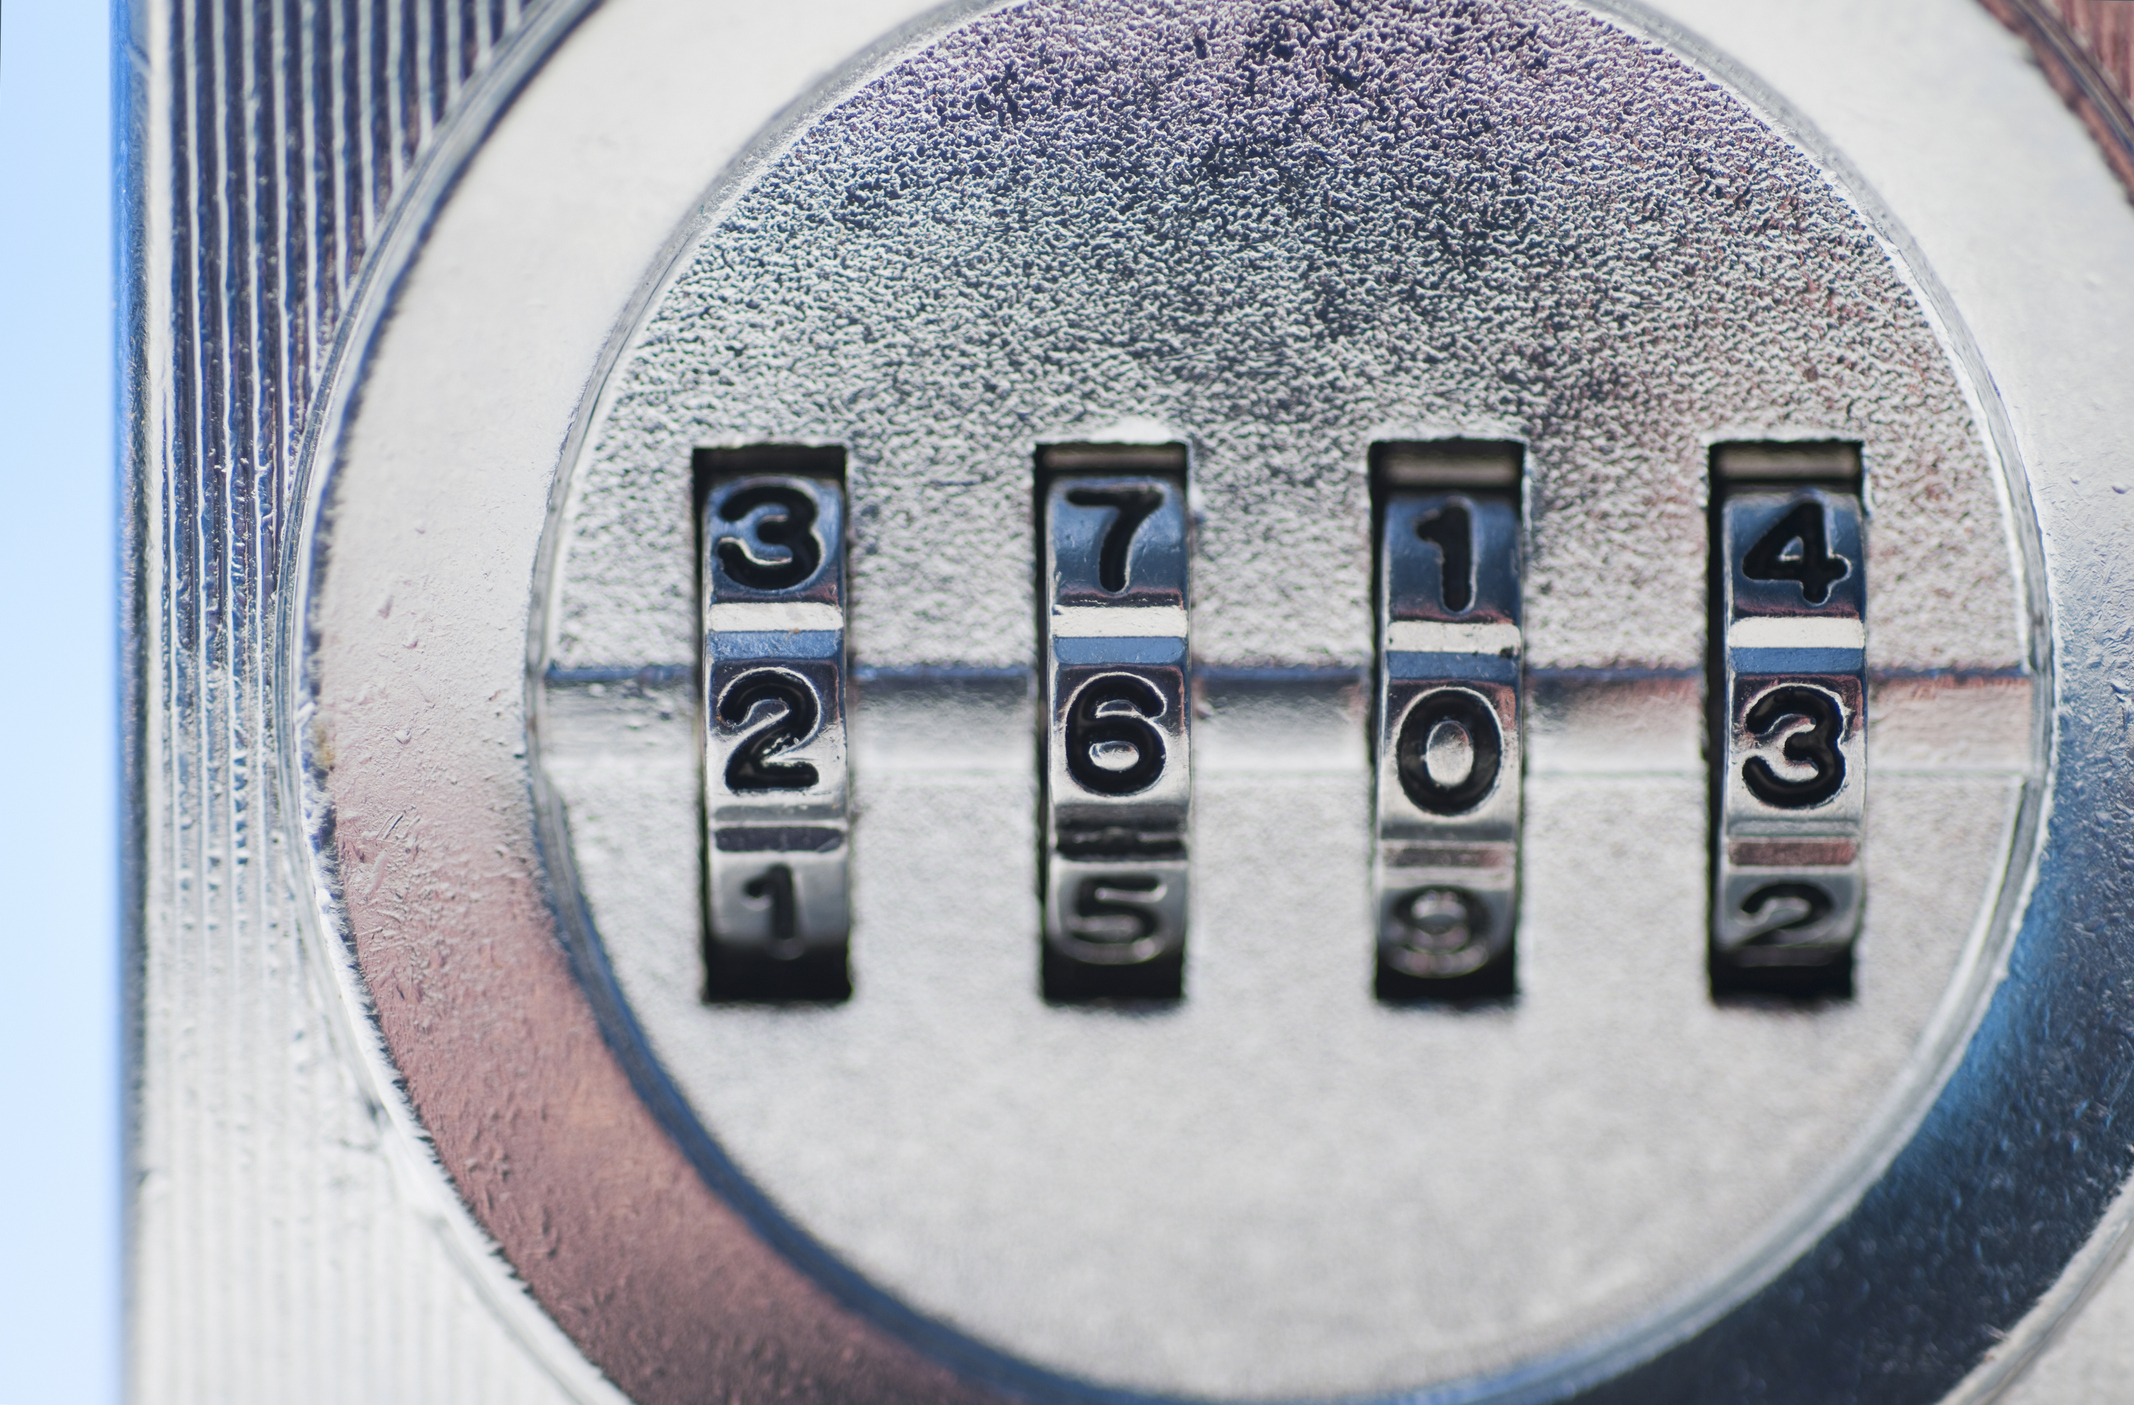 Close-up of a combination lock displaying the numbers 2-6-0-3